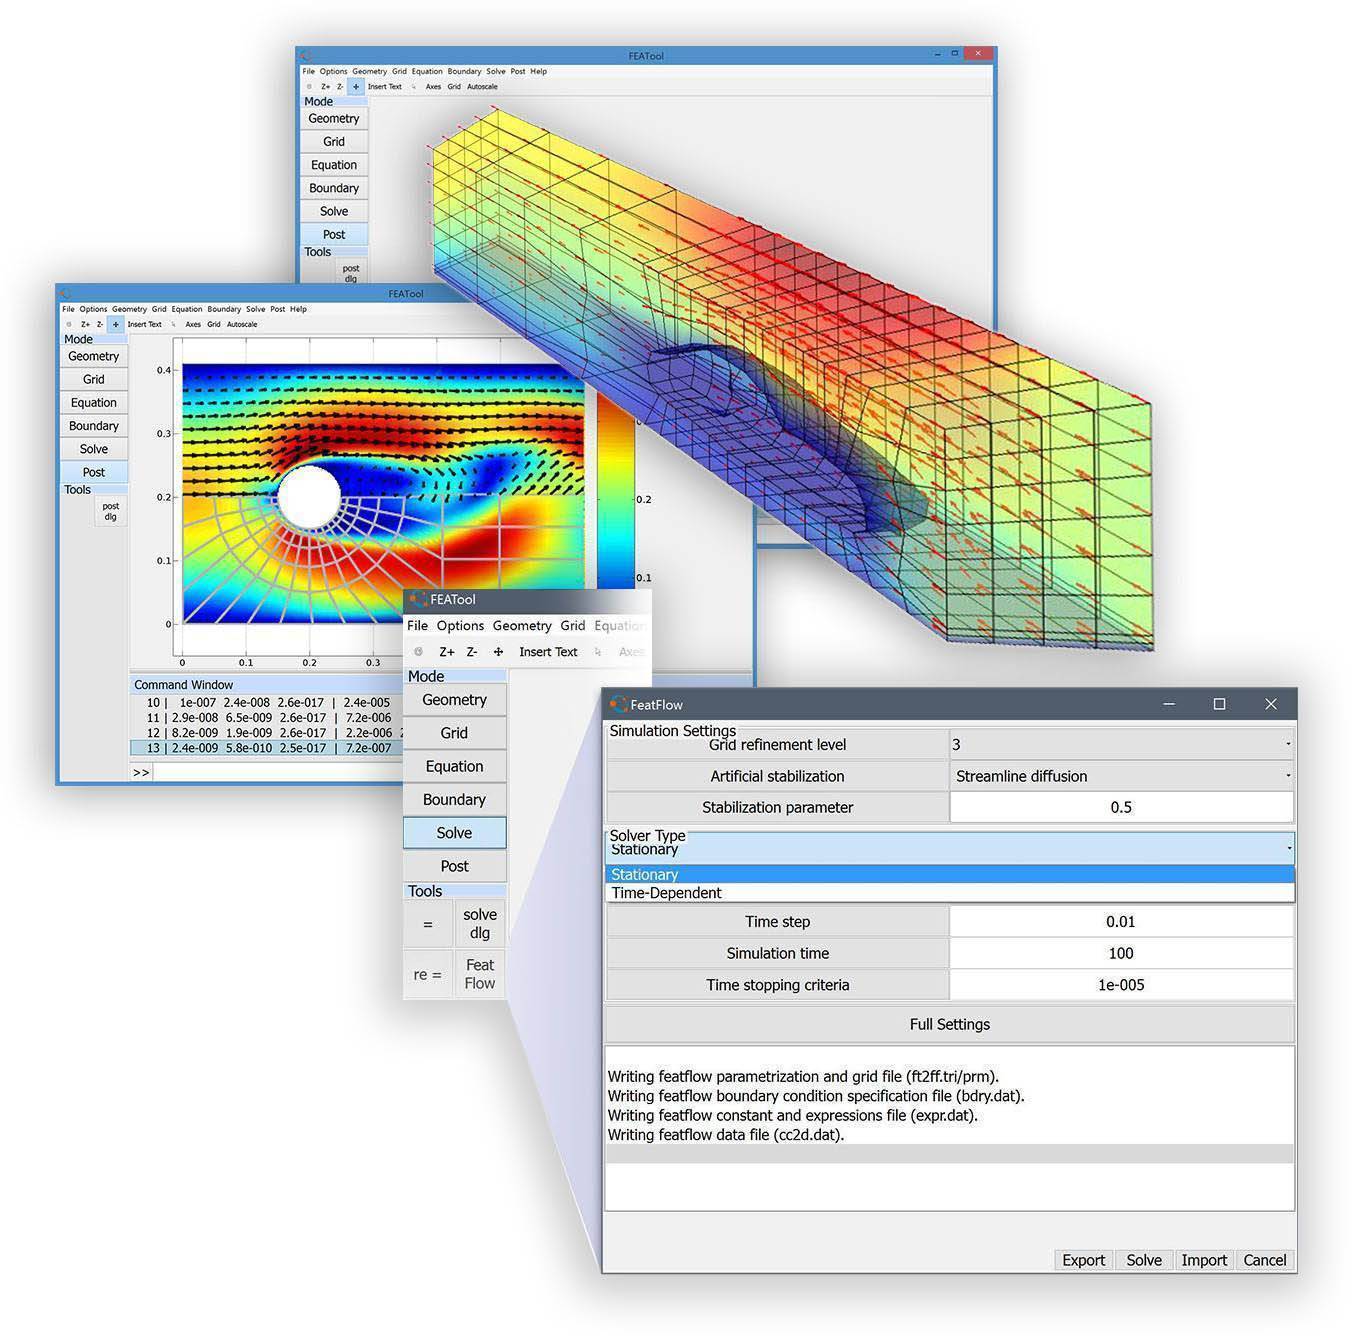 toolboxes in matlab